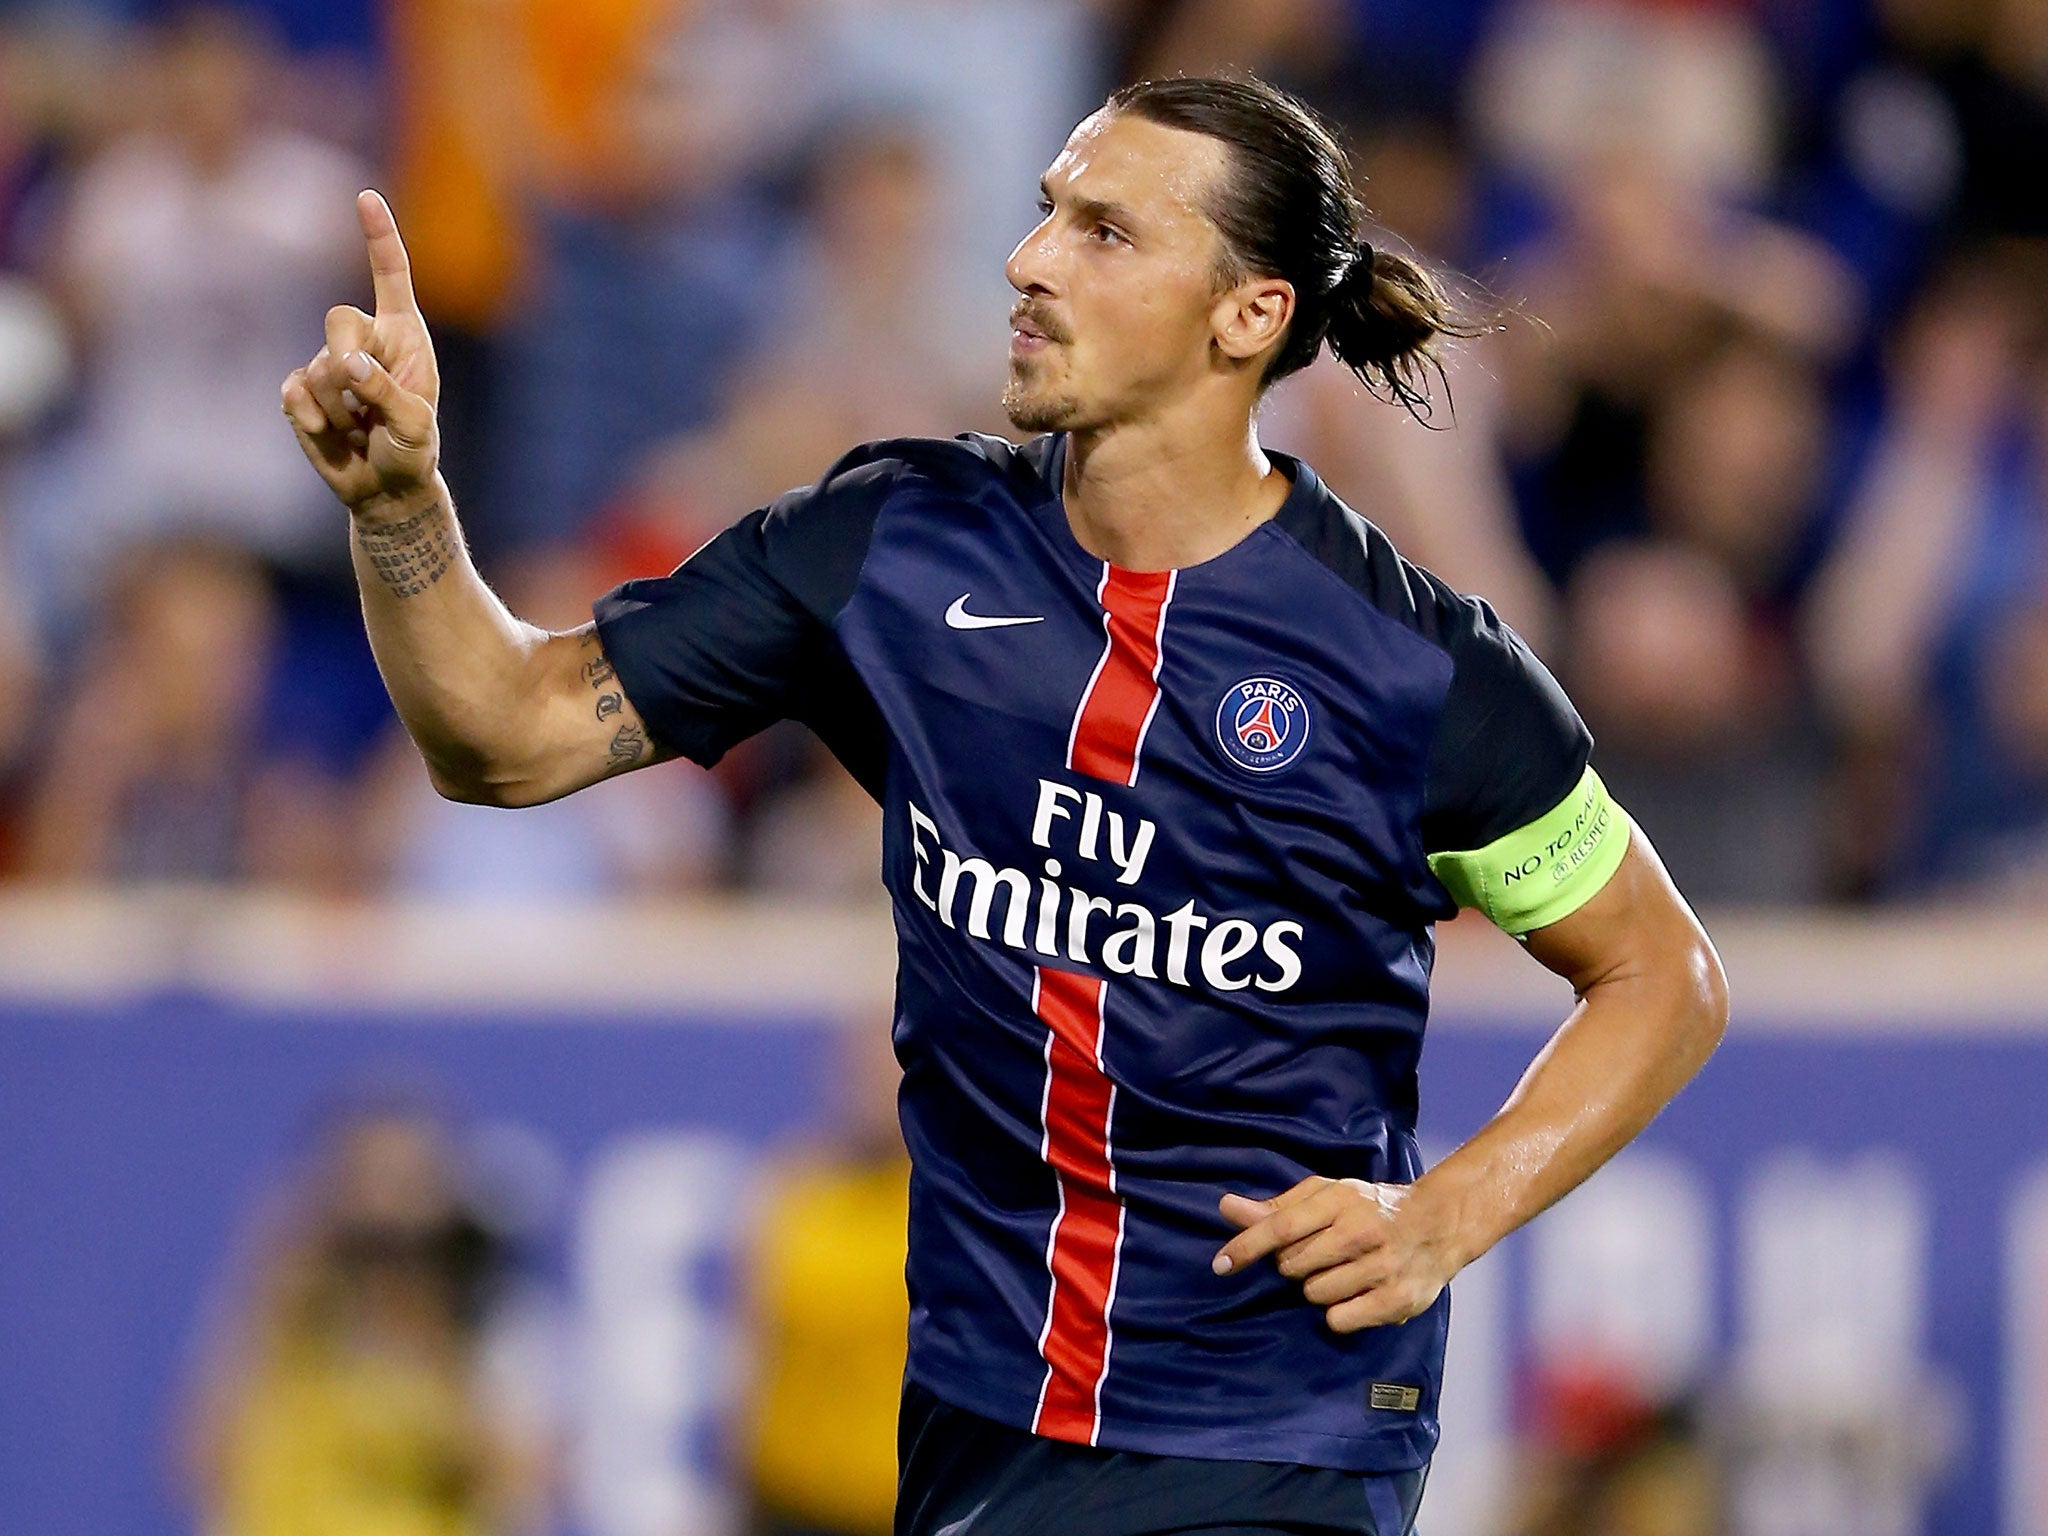 Ibrahimovic to Manchester United? 'My next move be a surprise' says PSG striker | The Independent | Independent